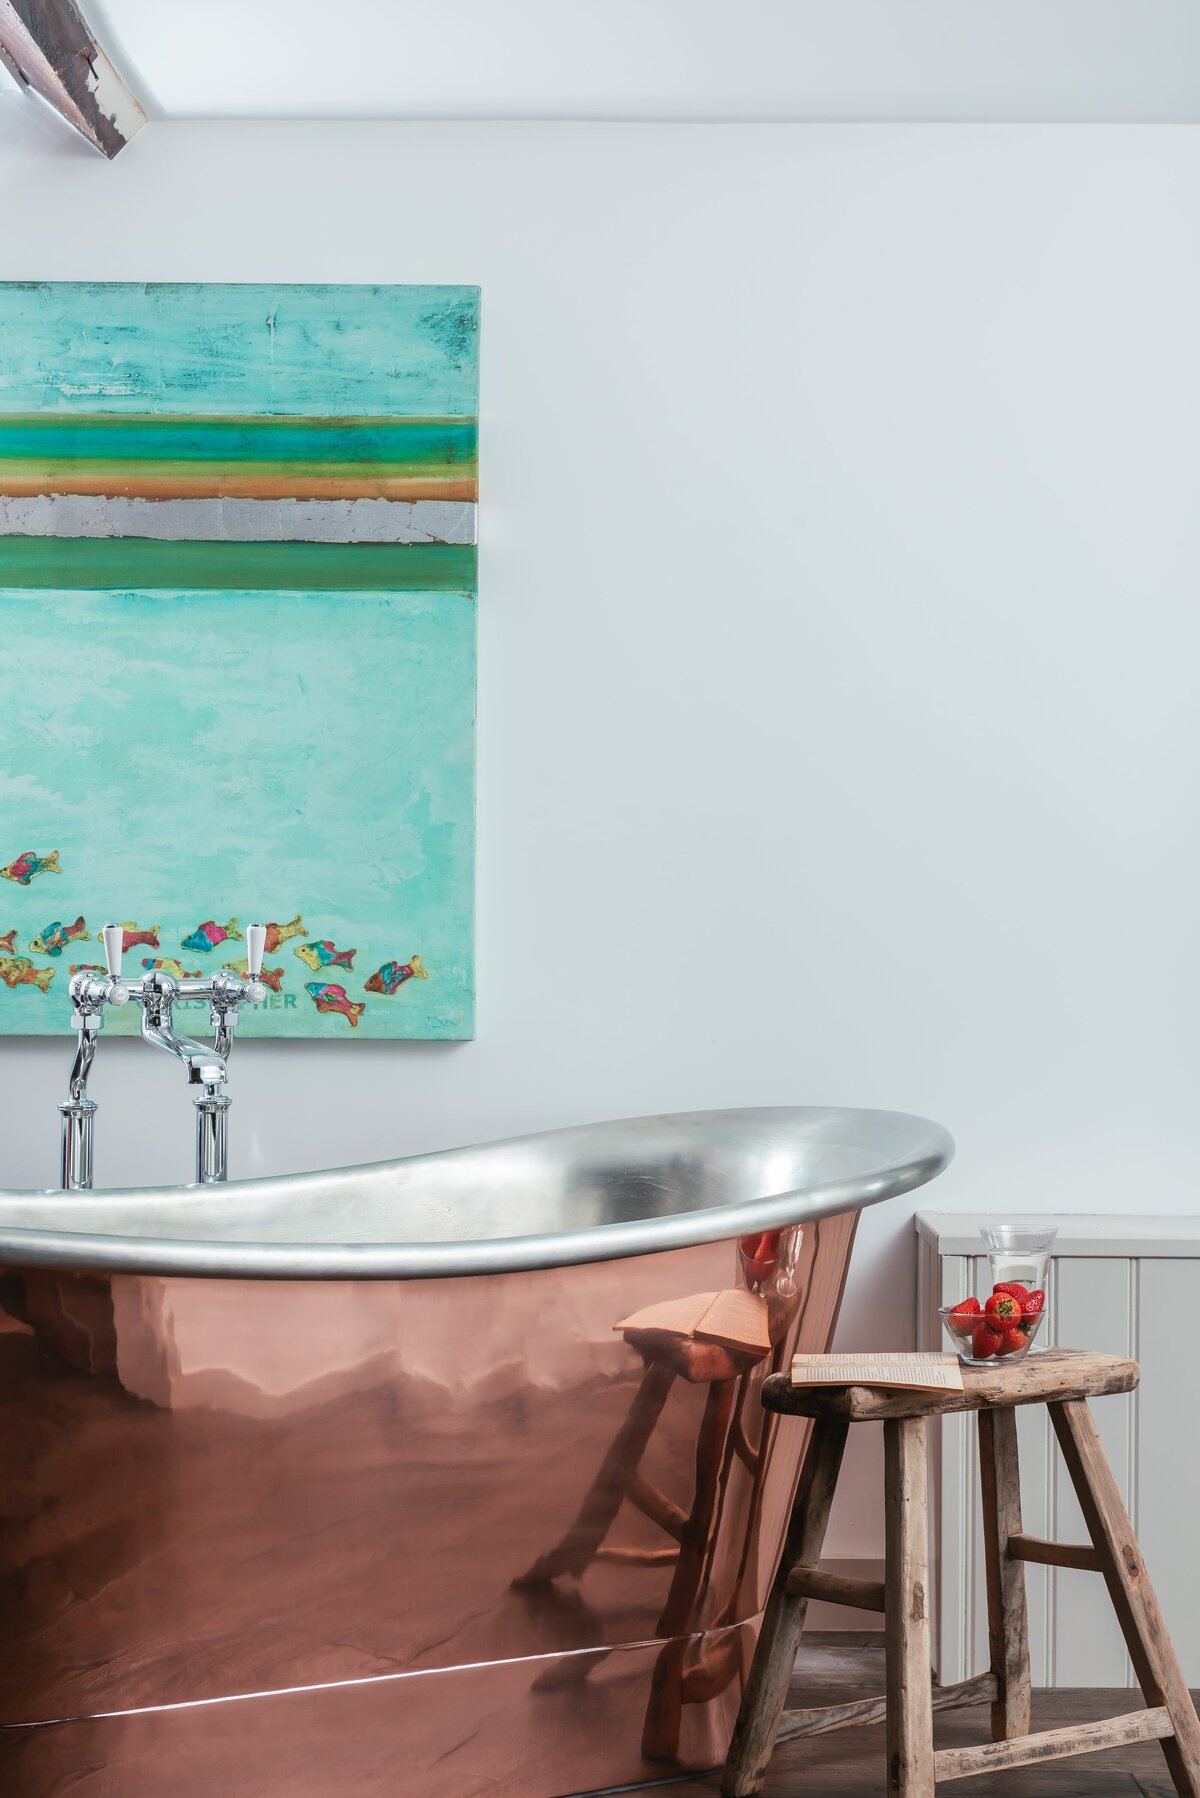 Copper bath with stool beside and painting behind